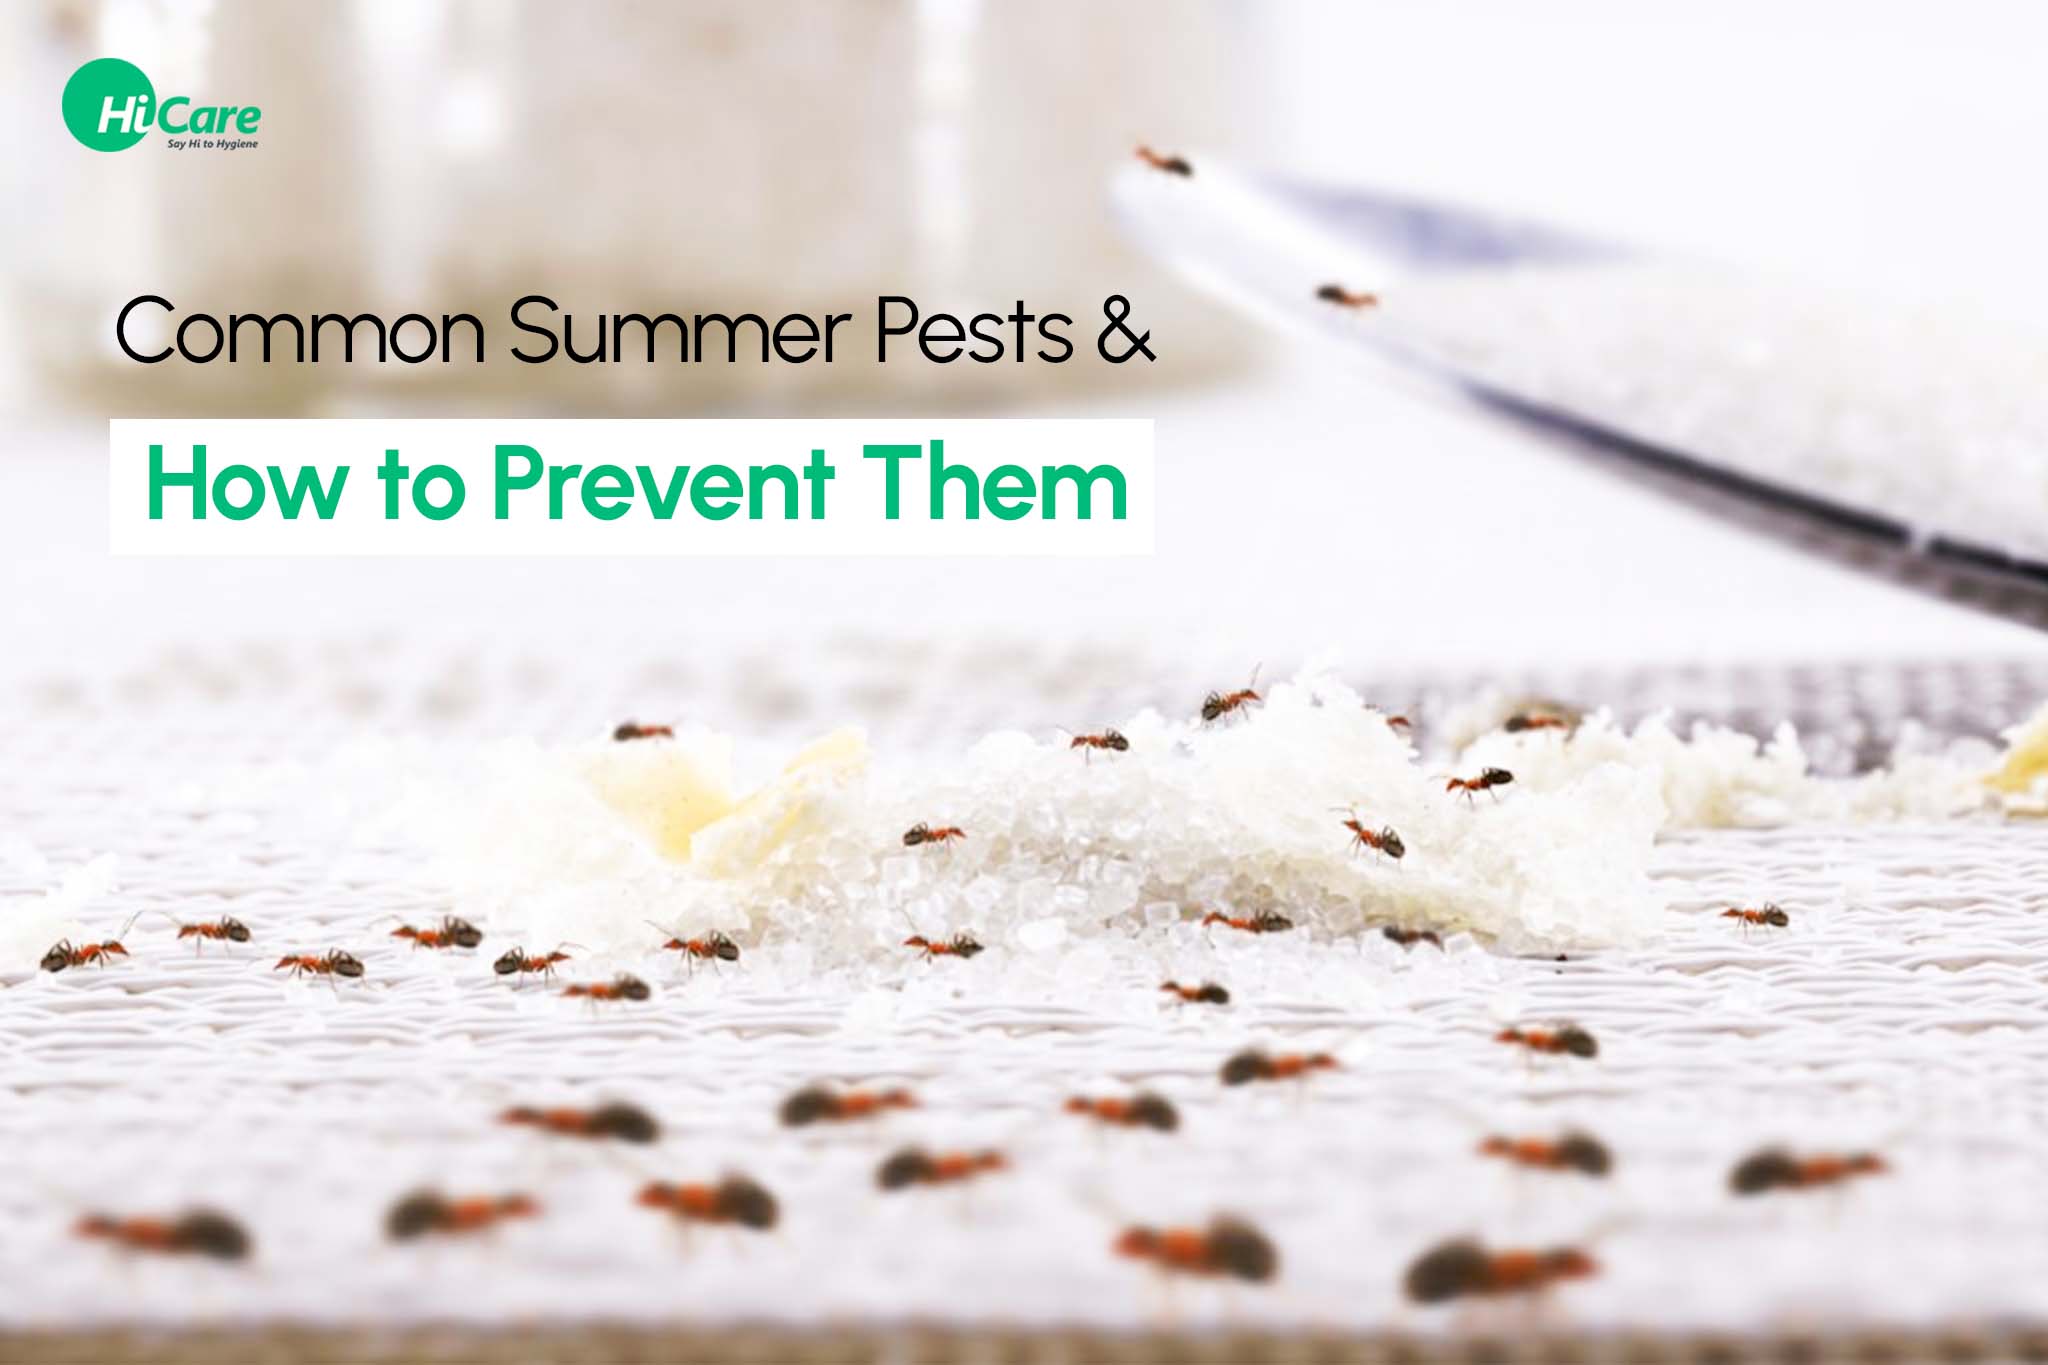 5 Common Summer Pests and How to Prevent Them | HiCare